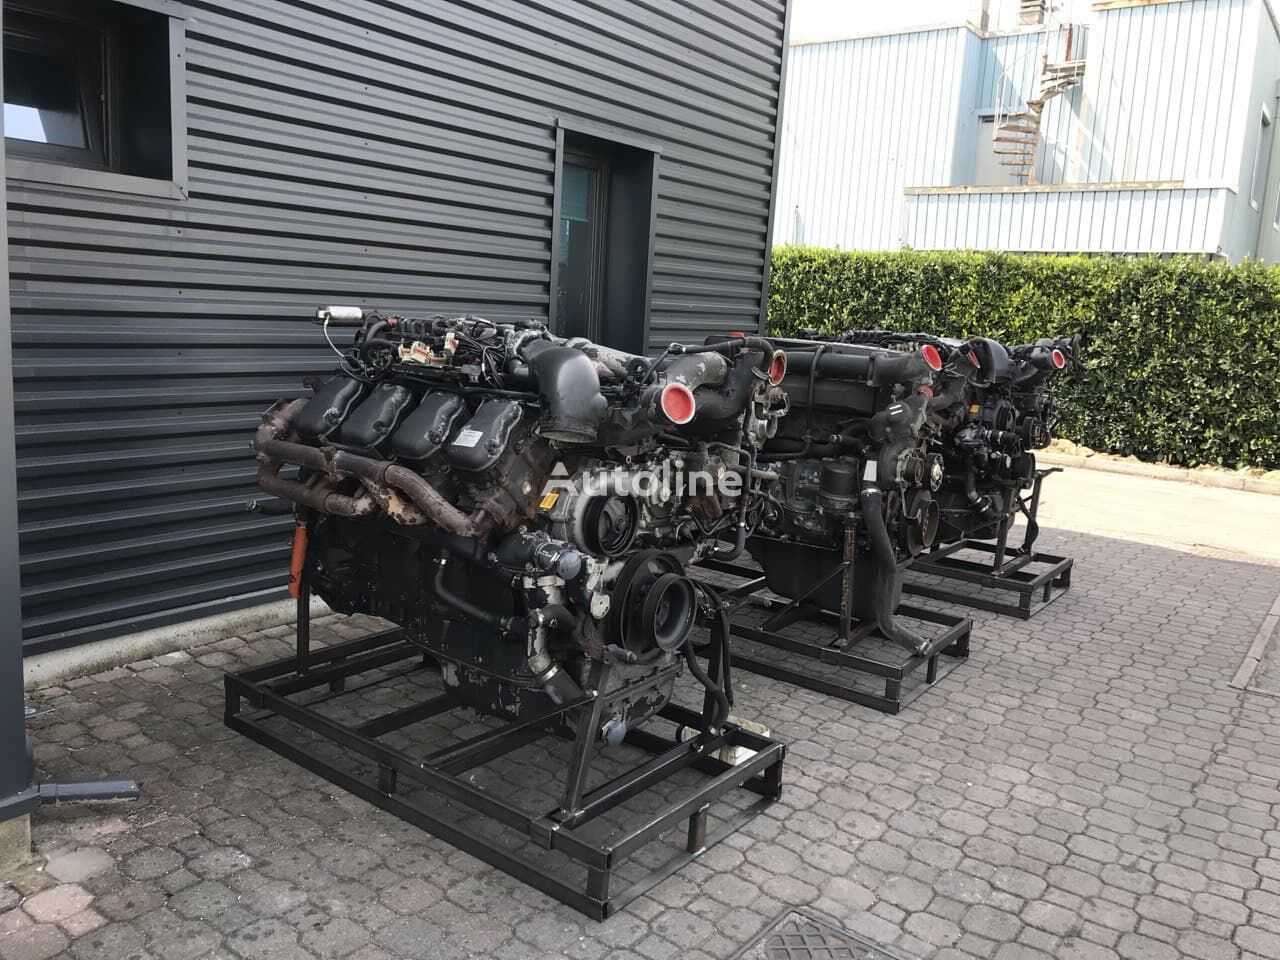 Scania DC16 560 hp PDE engine for Scania R560 E5 EURO 5 truck